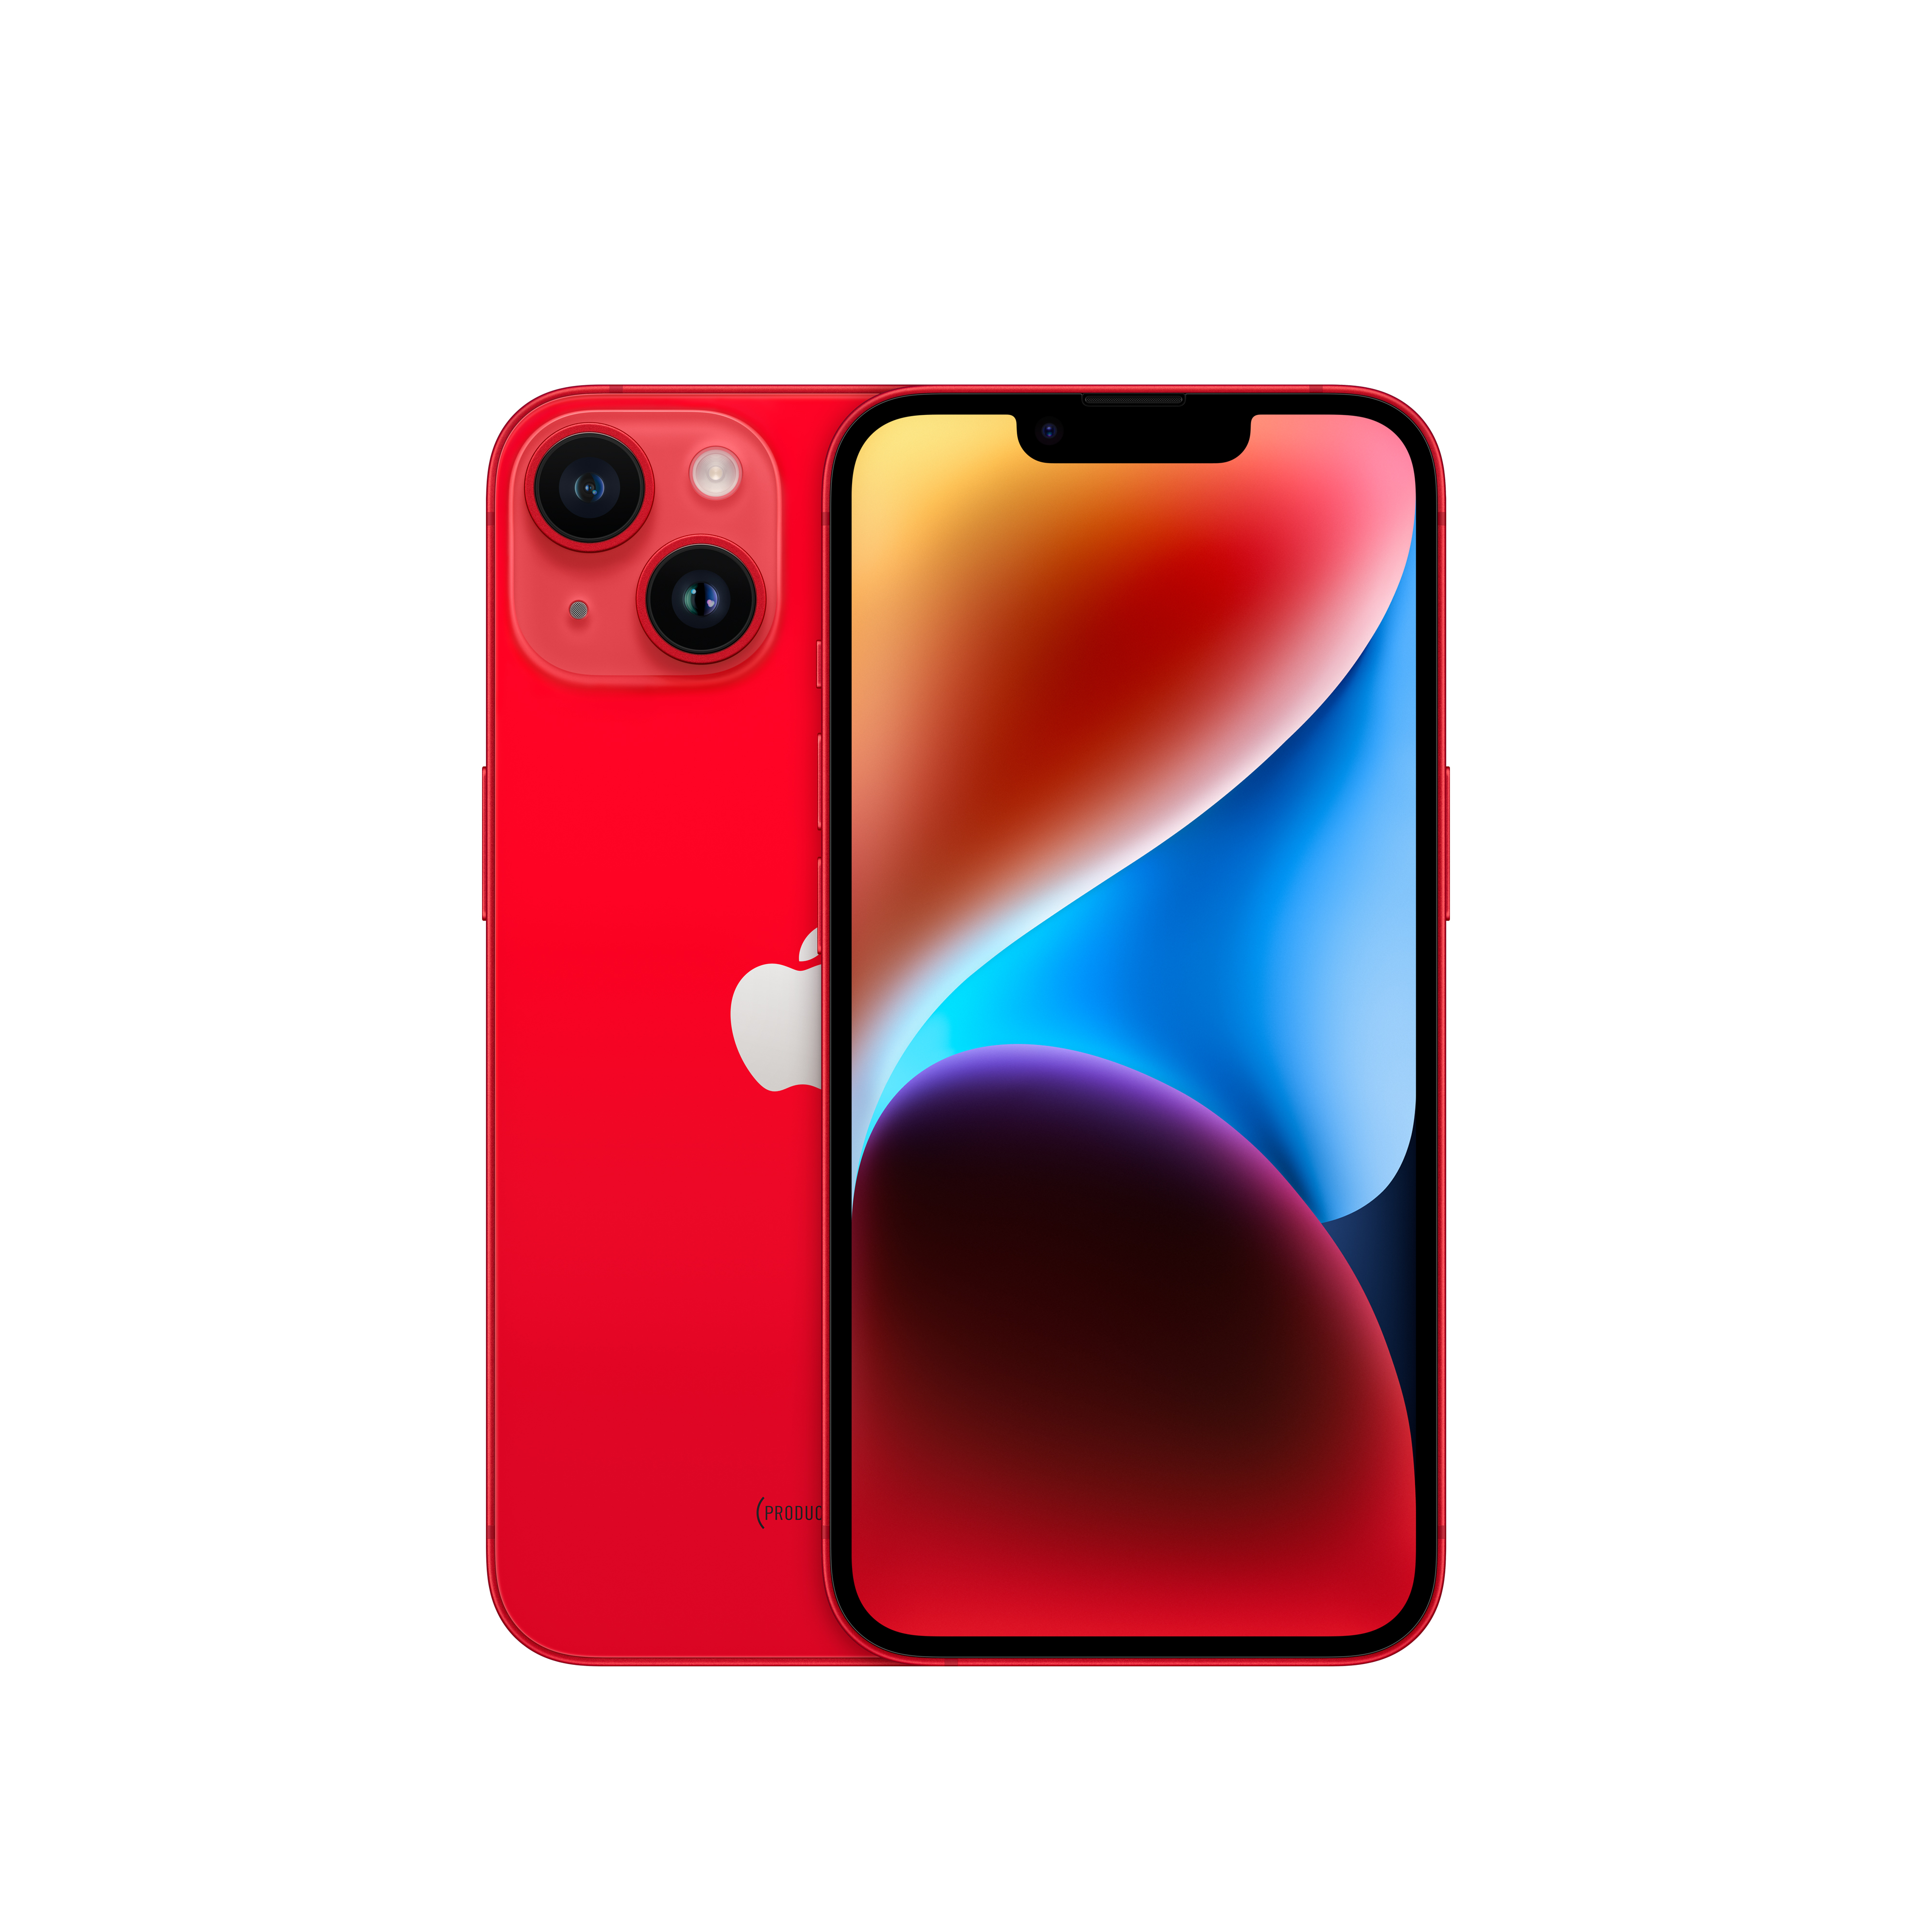 Apple iPhone 14 (3L232HN/A) RED with 128GB, iOS 16, A15 Bionic chip, 6core CPU with 2 performance, 6.1 inch OLED display